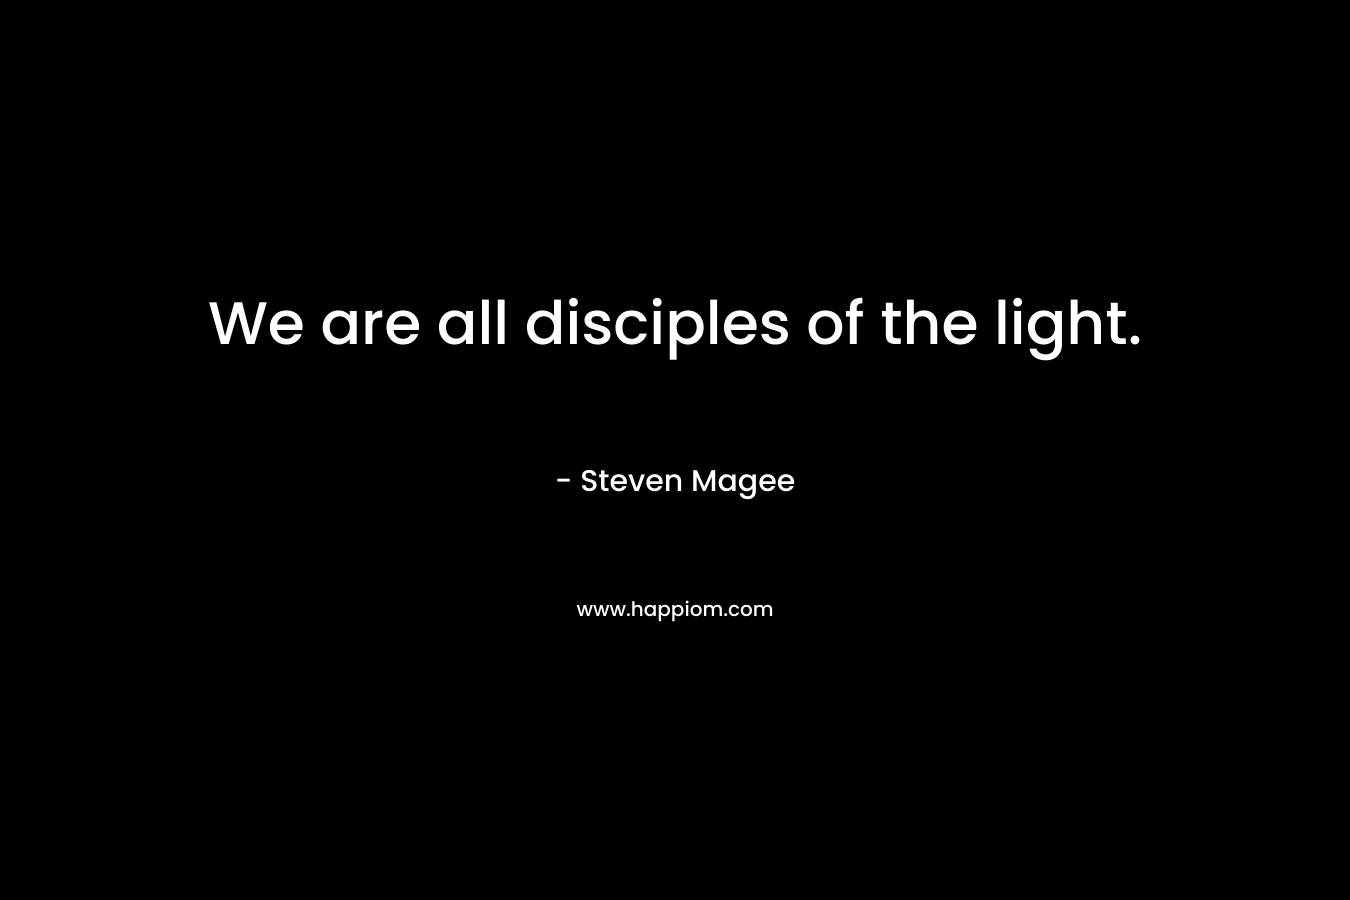 We are all disciples of the light.